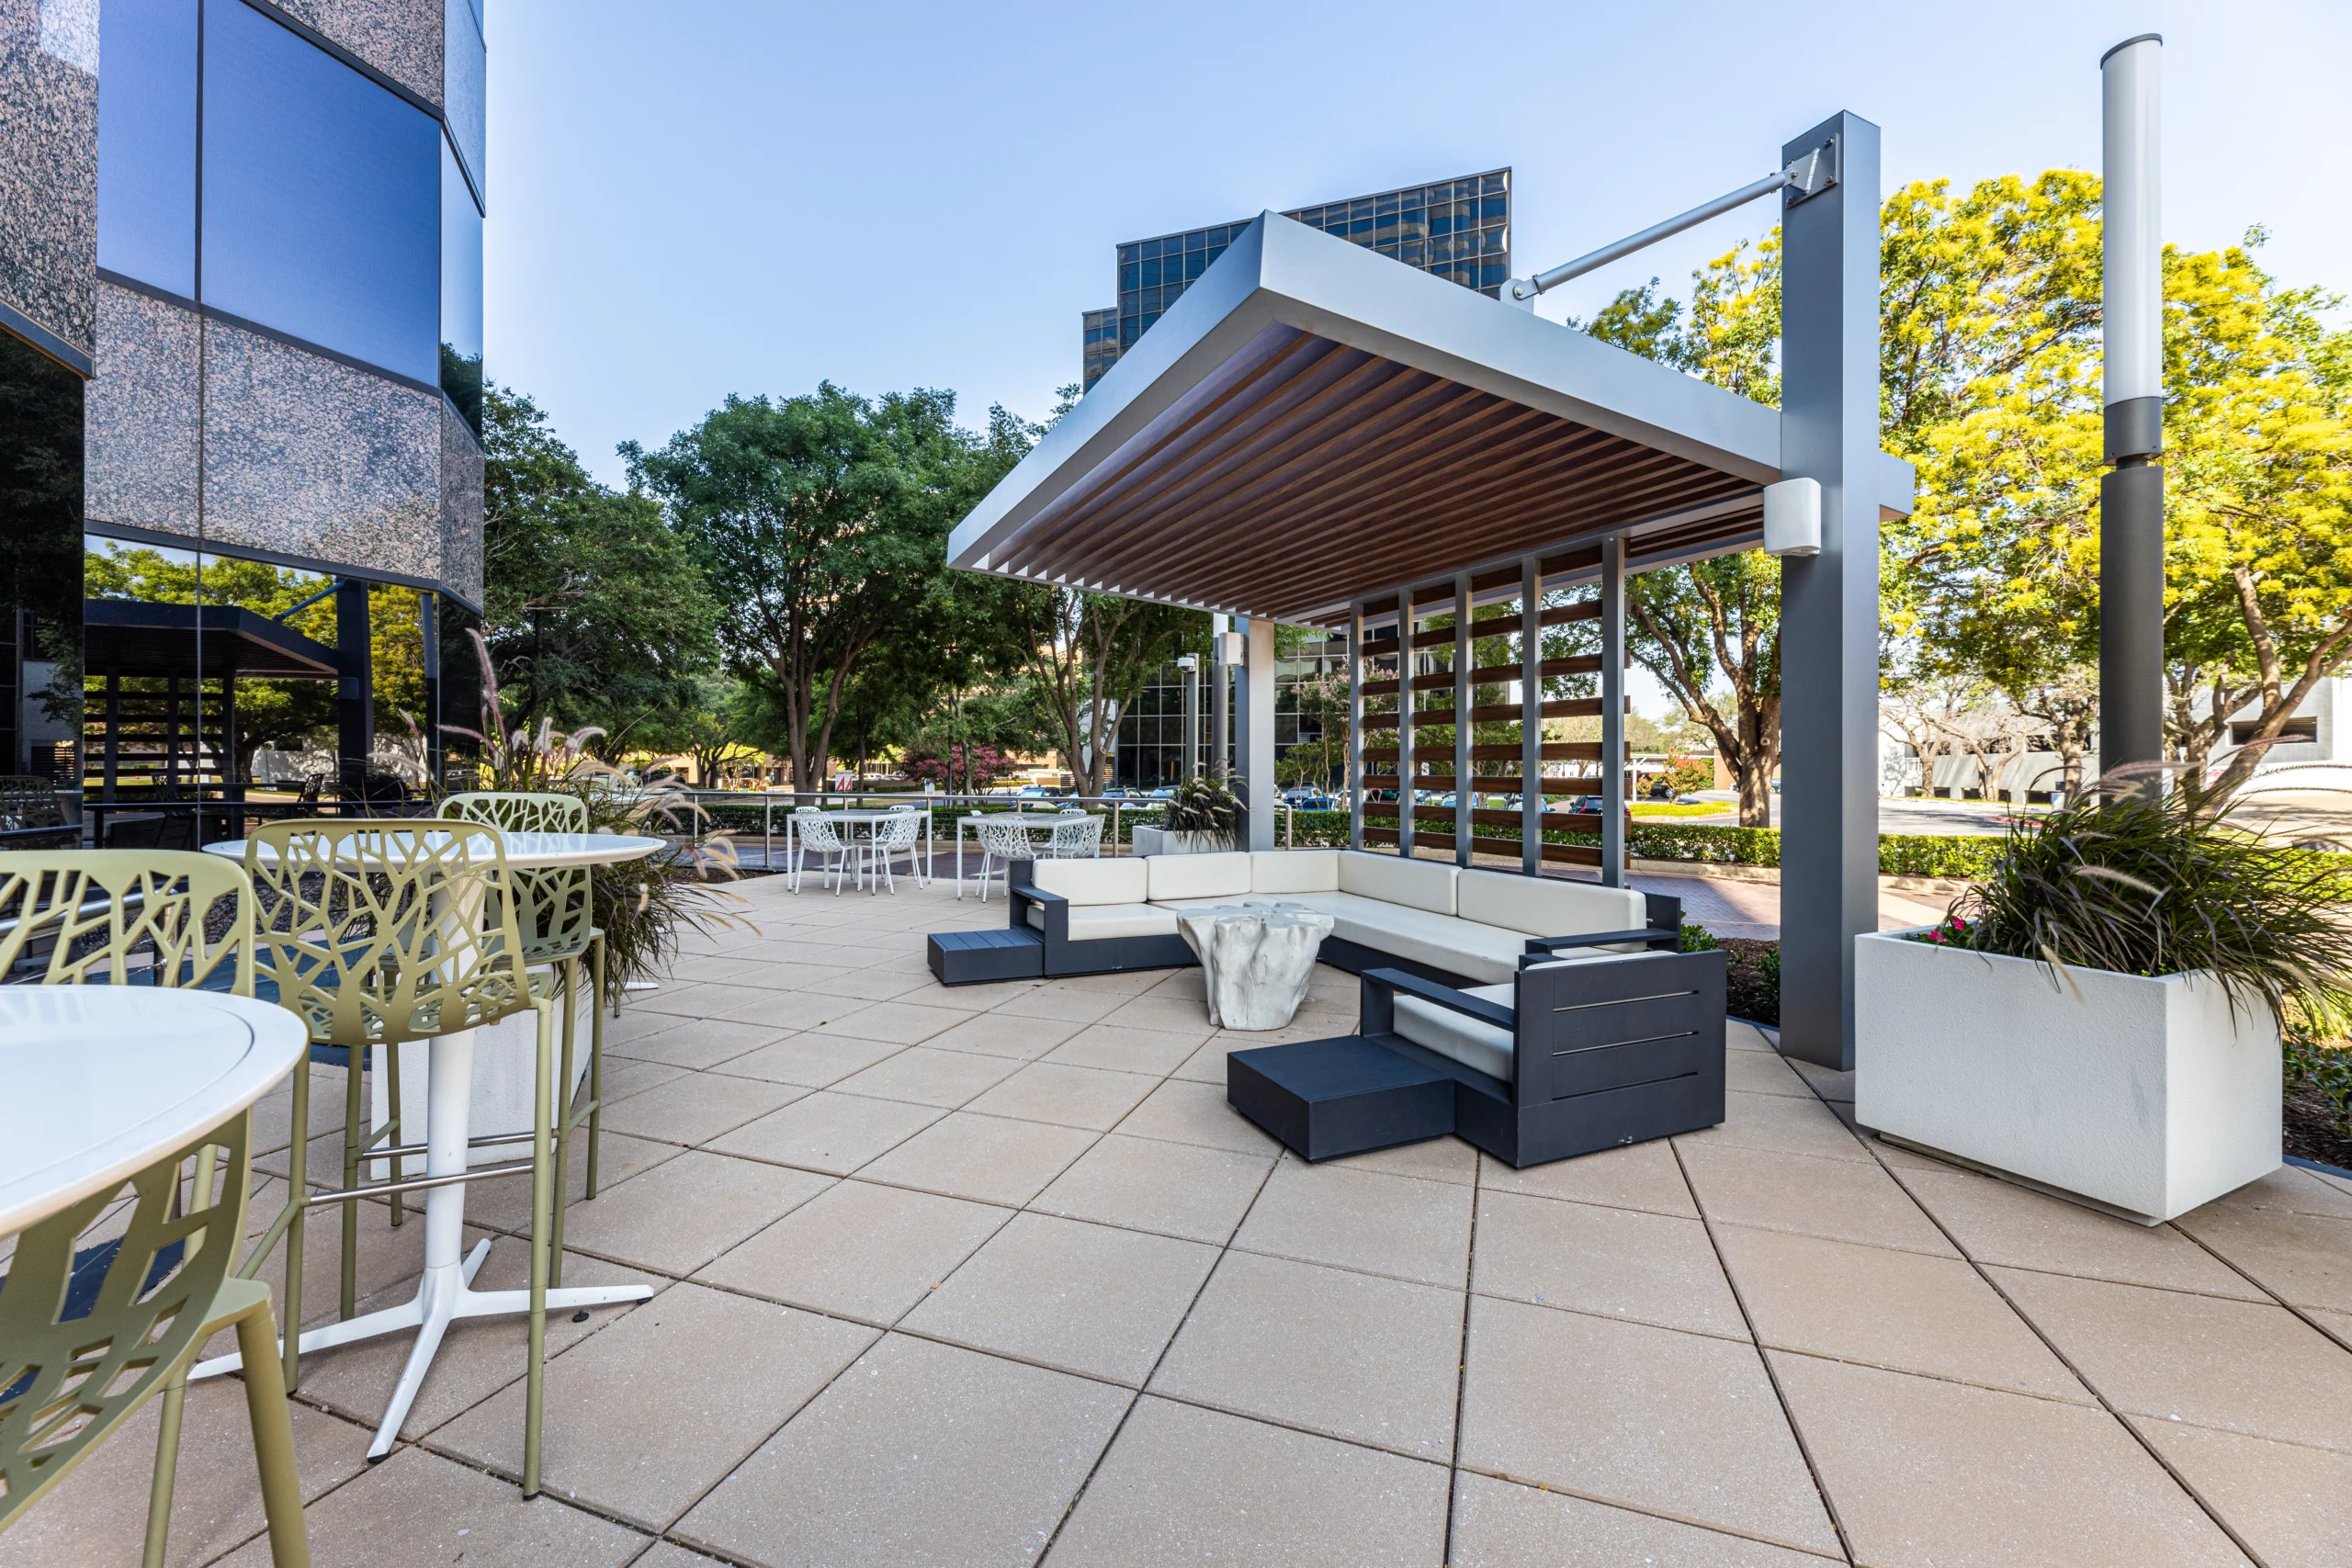 Outdoor seating at Pinnacle Tower (Photo courtesy of Square Foot Photography, which gives Stream Realty Partners the right to use and distribute for editorial purposes now and in the future.) 